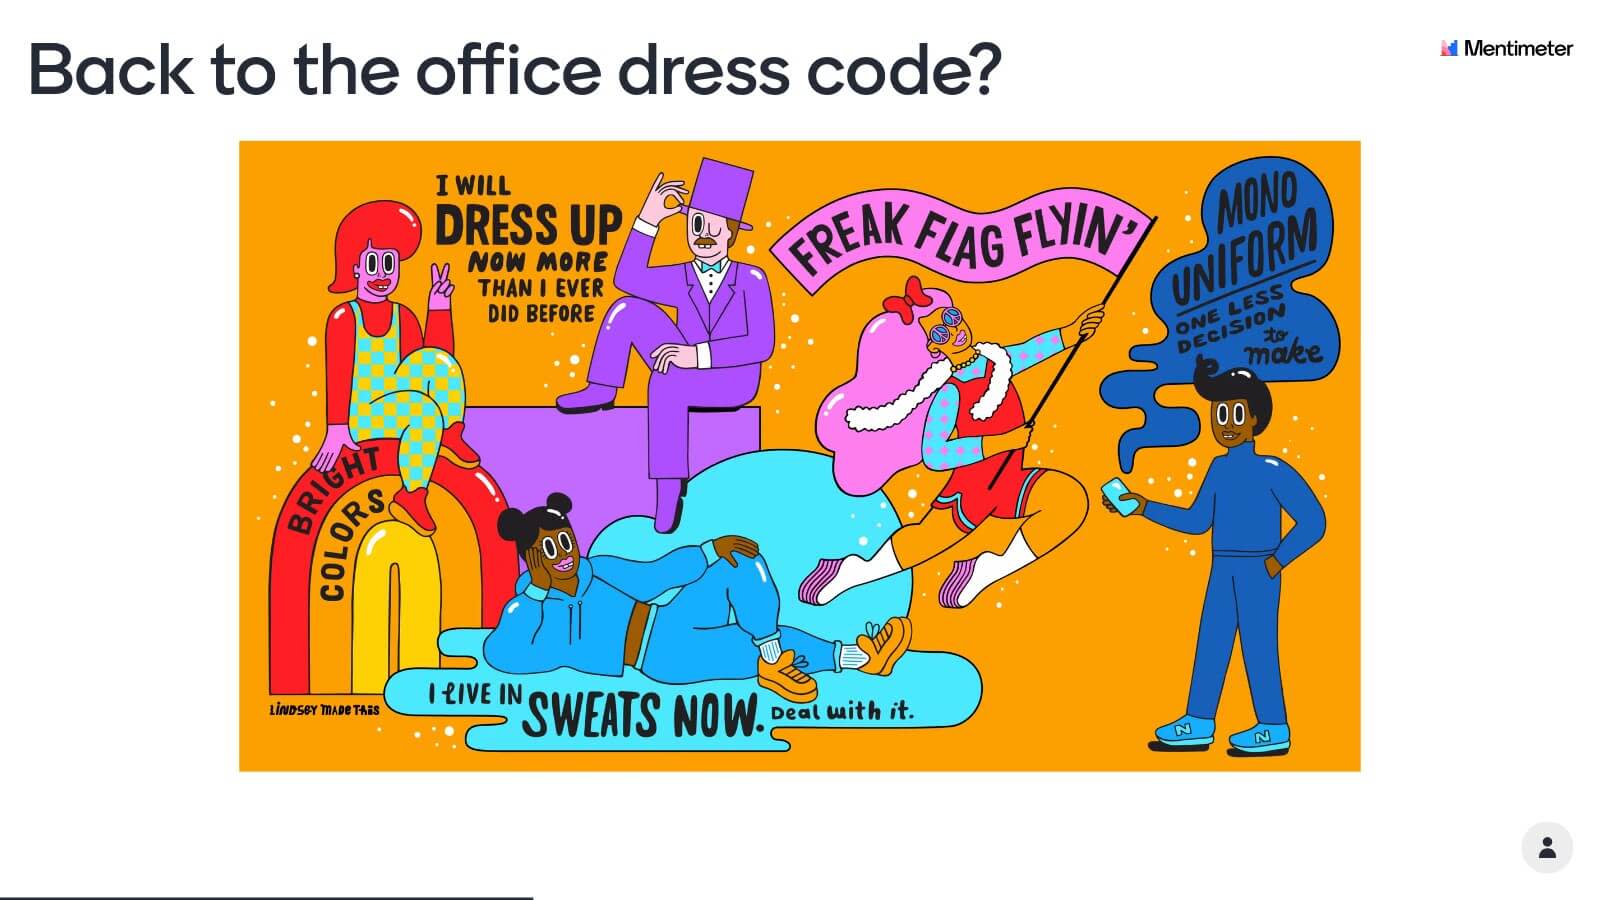 Back to the office dress code?